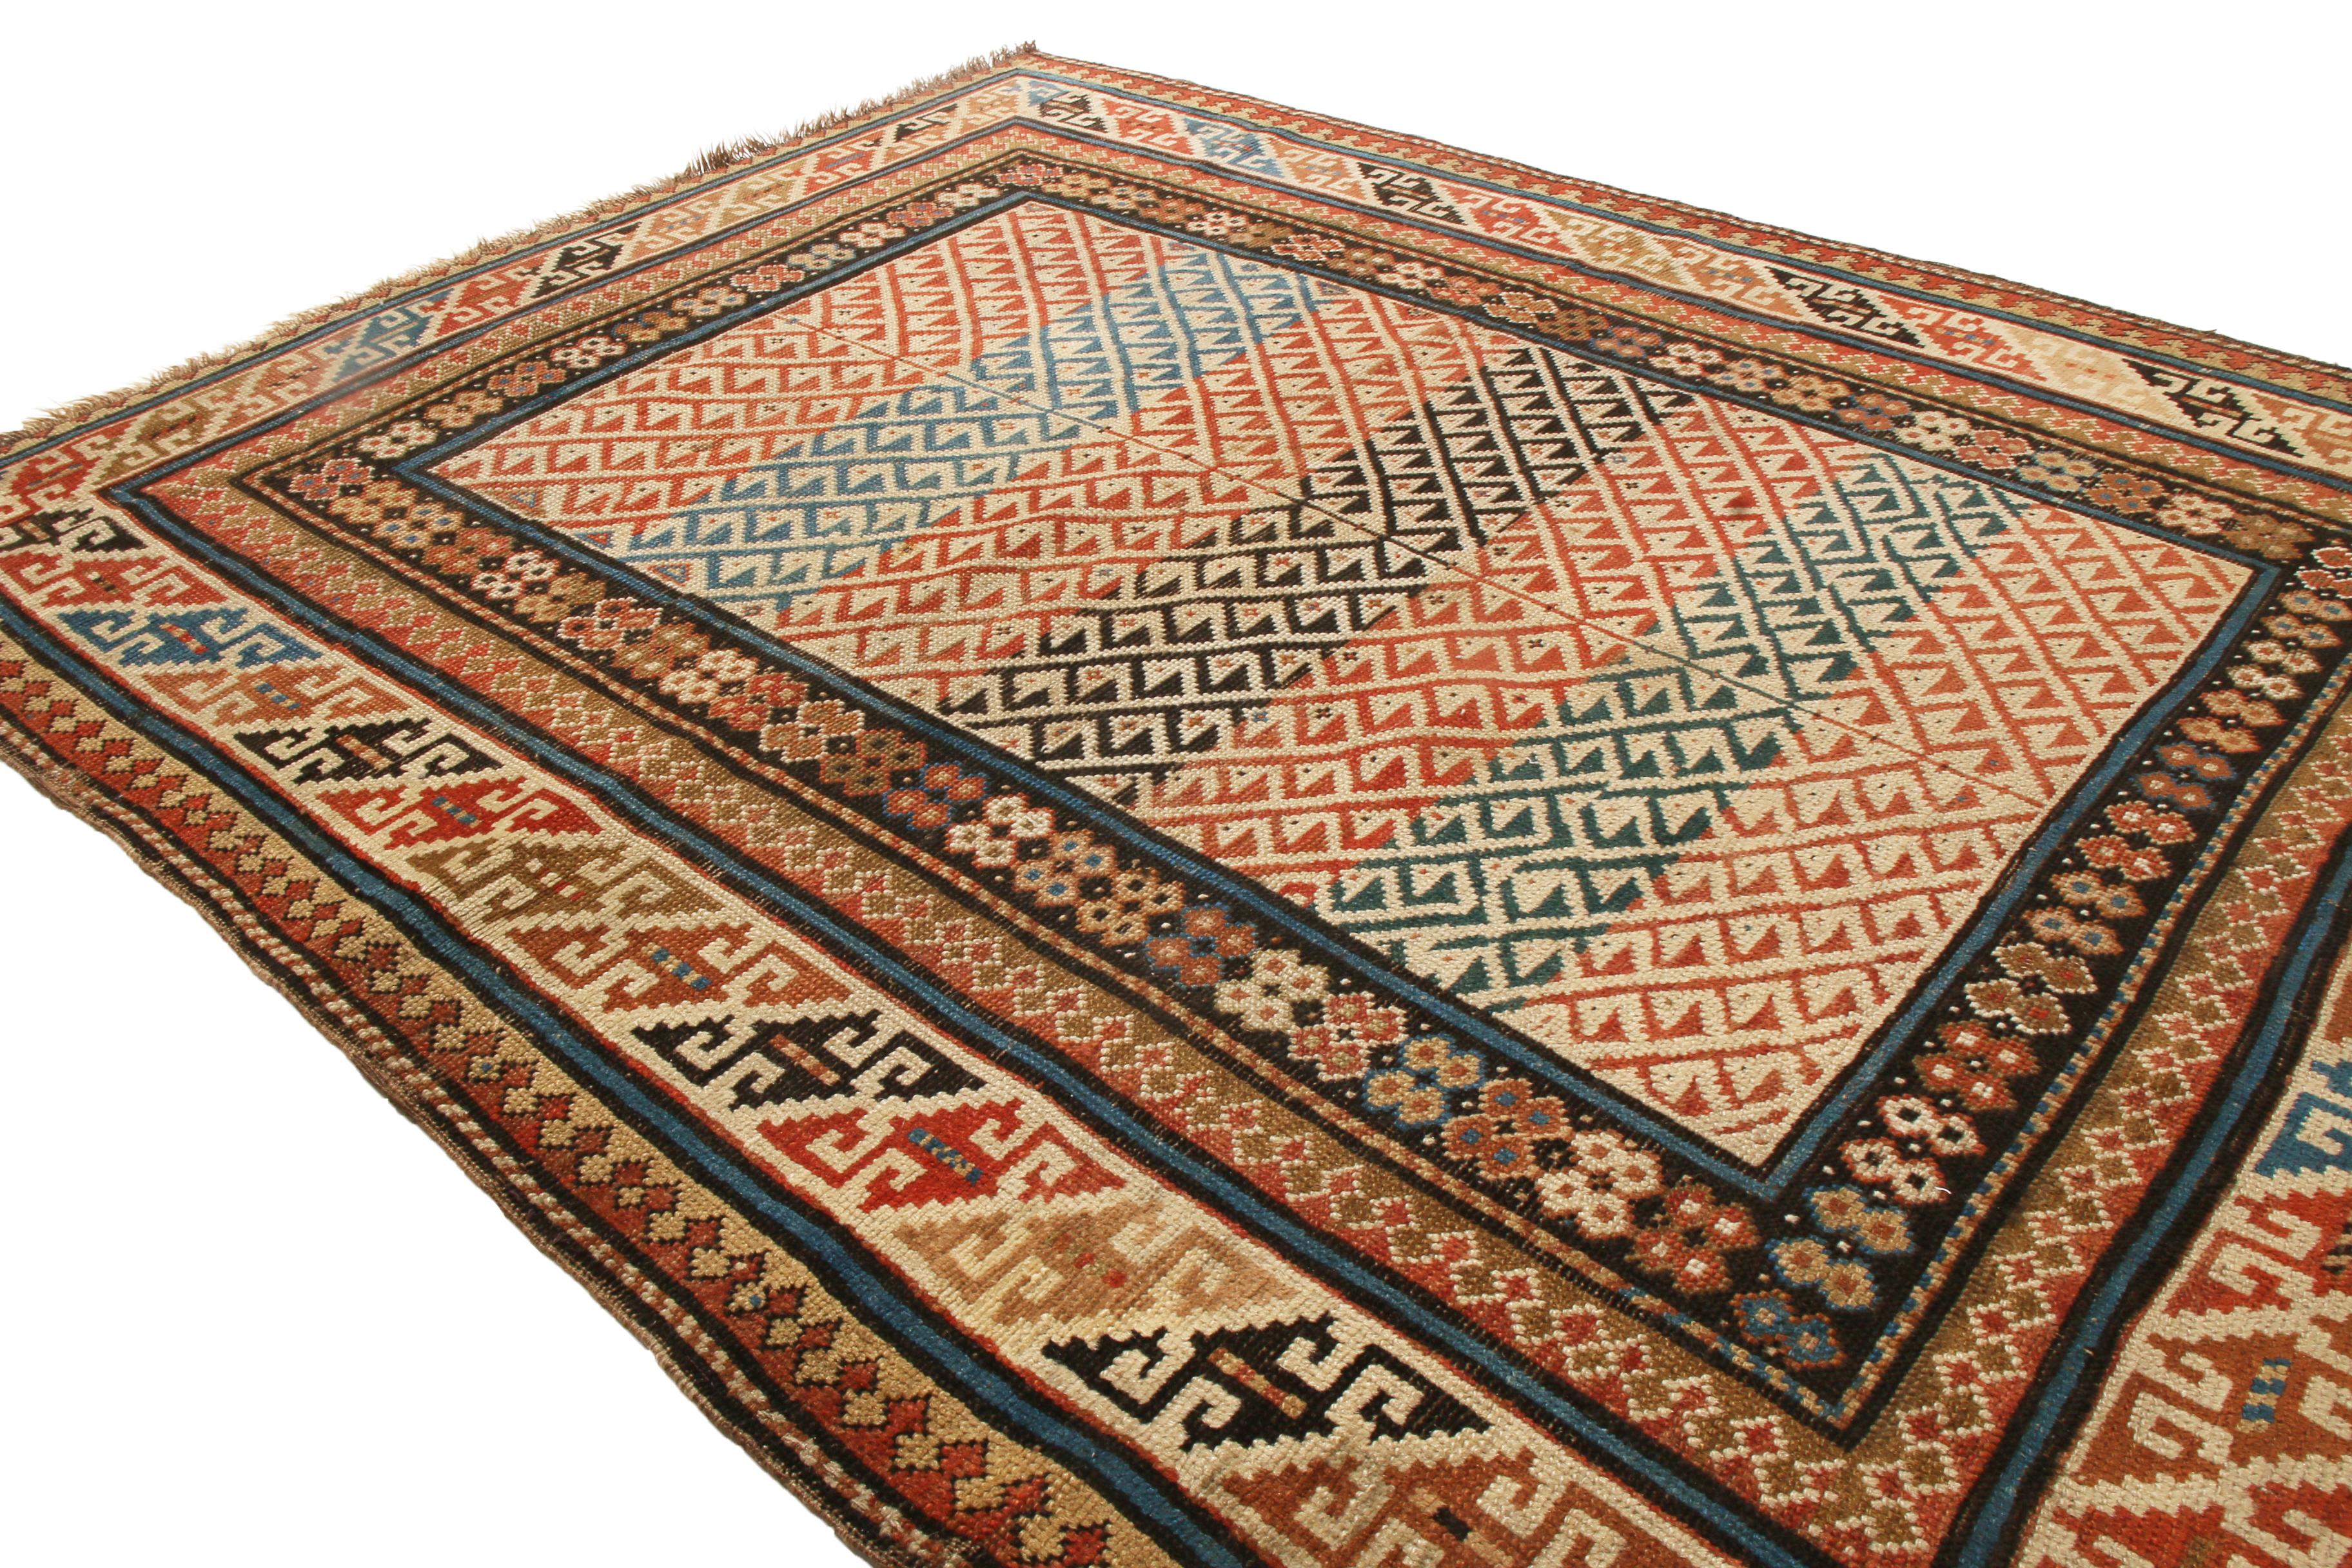 European Antique Kuba Traditional Rug in Red and Beige Geometric Pattern by Rug & Kilim For Sale